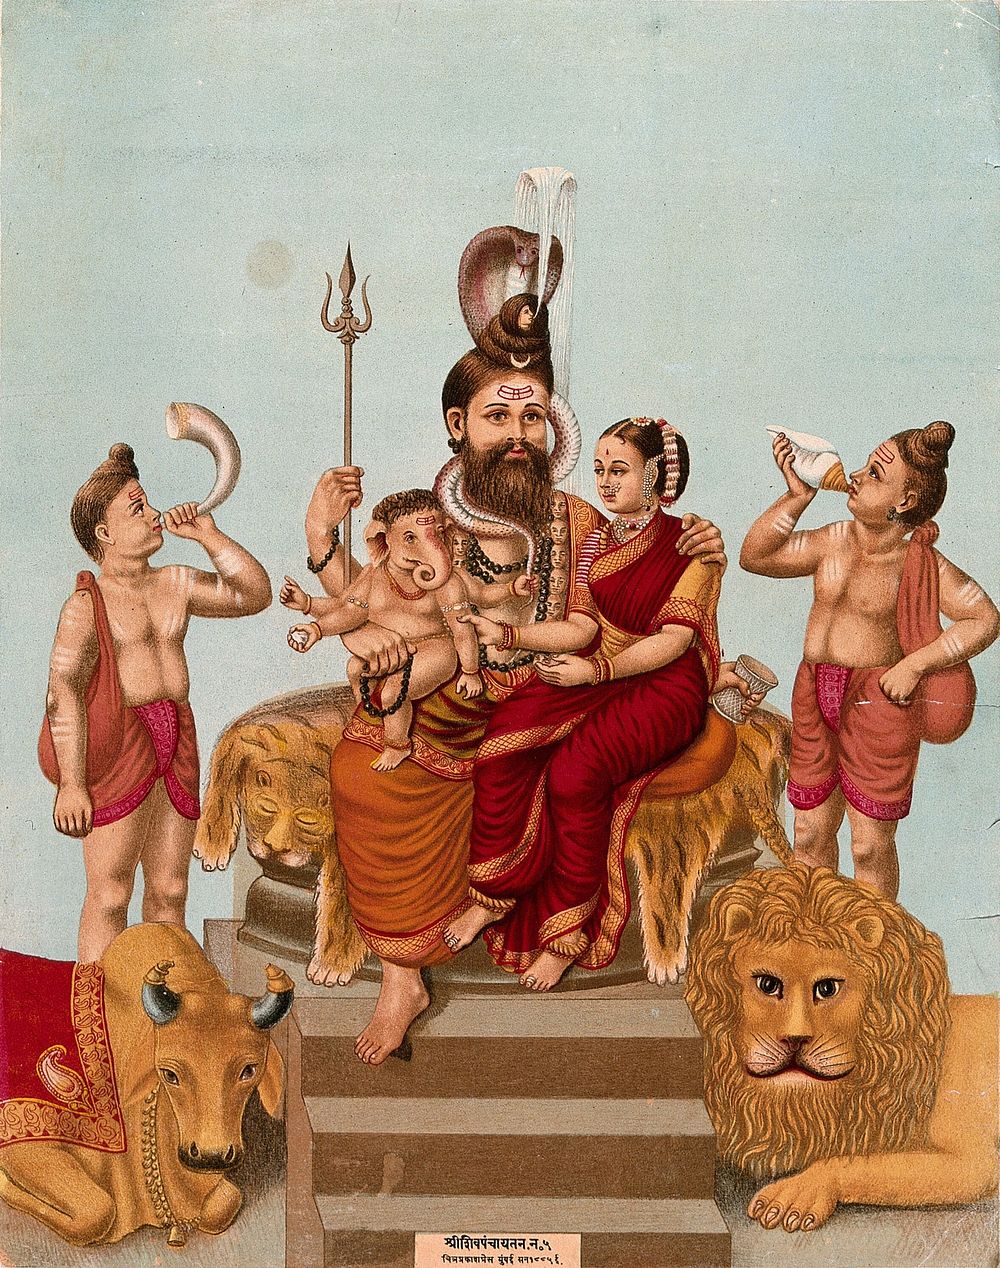 Shiva enthroned with his family, Parvati and Ganesha, attended by Nandi, a lion and two attendants. Chromolithograph, 1885.